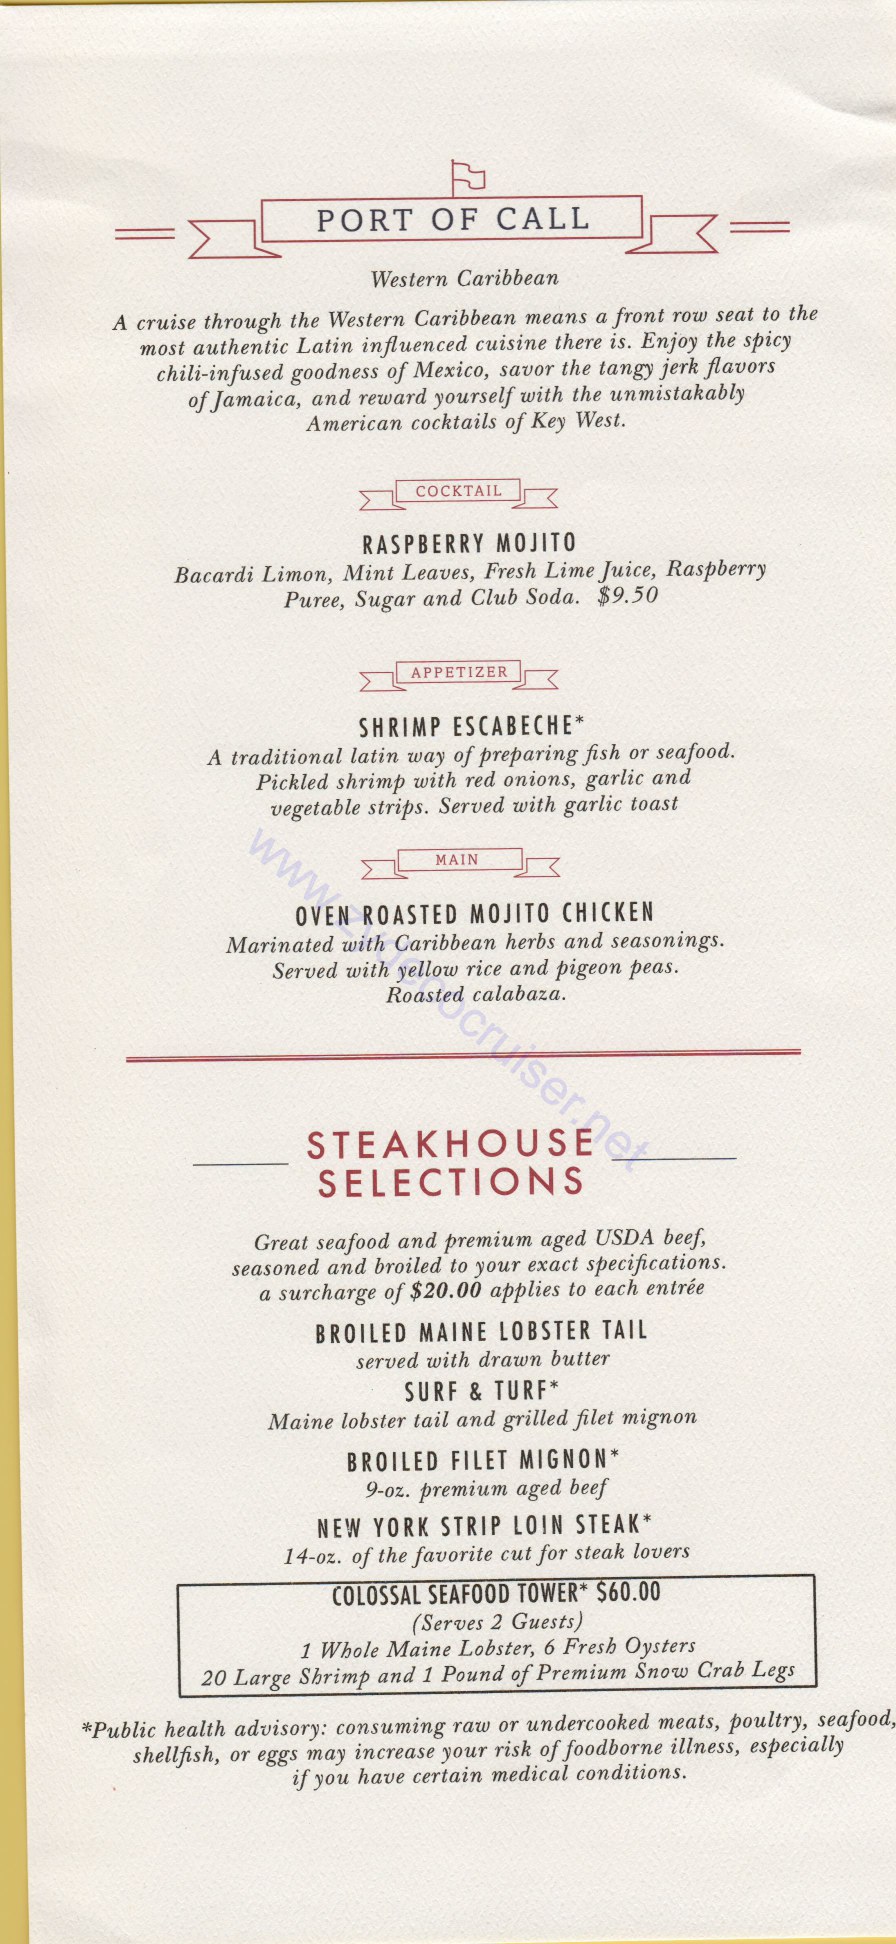 Carnival Horizon Day 10 MDR Dinner Sea Day 5 Port of Call Menu